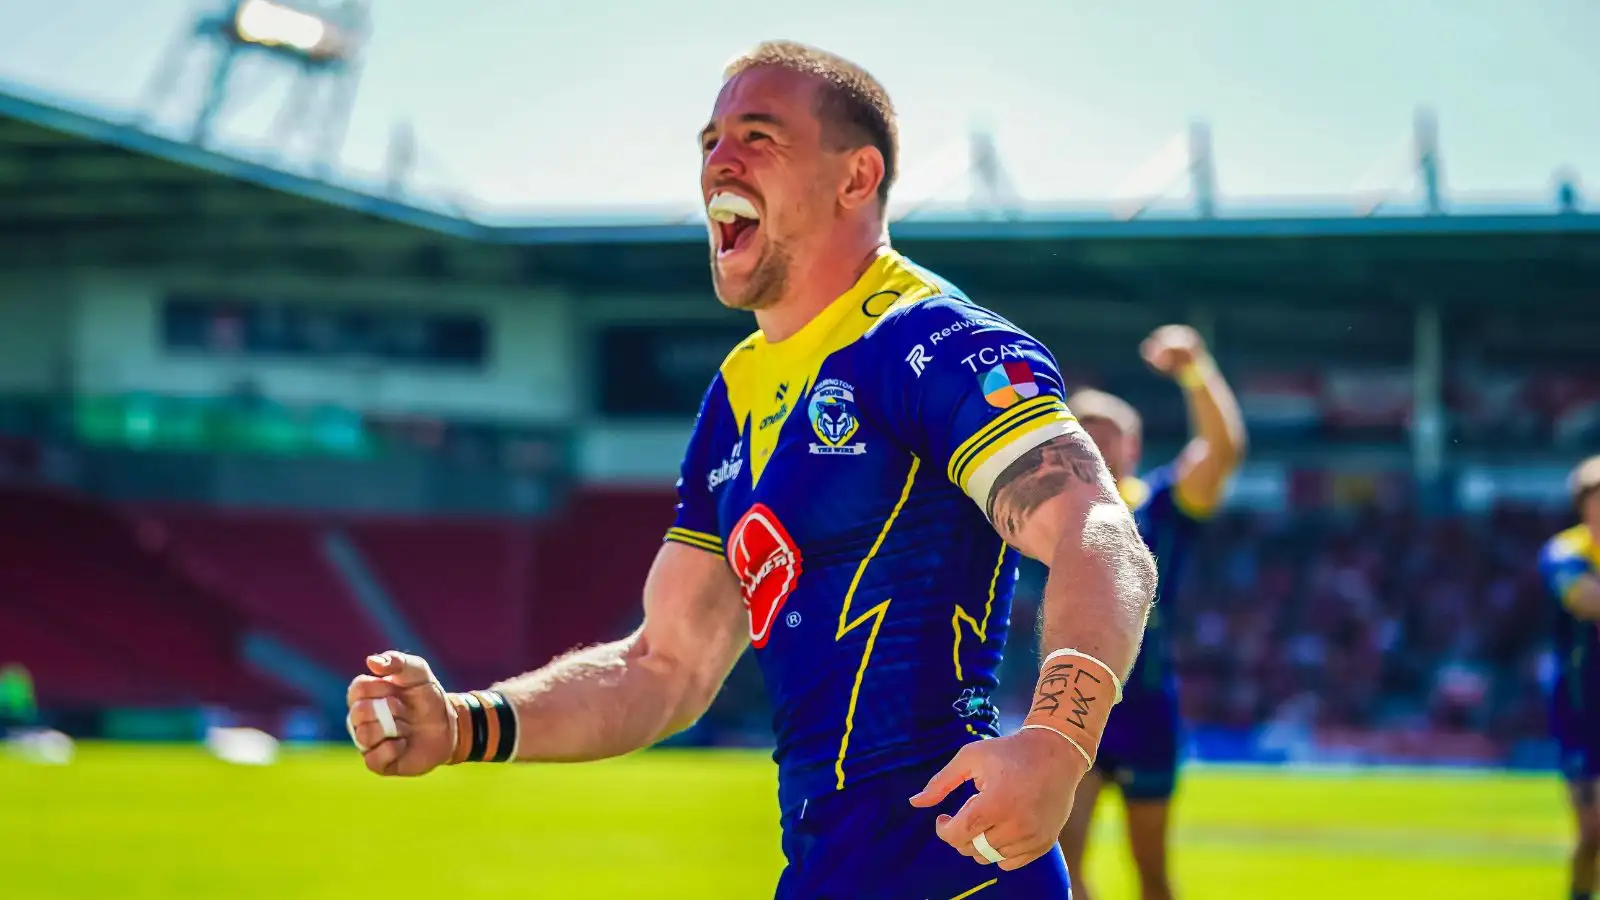 Warrington Wolves’ milestone man marks achievement with special showing against Leeds Rhinos